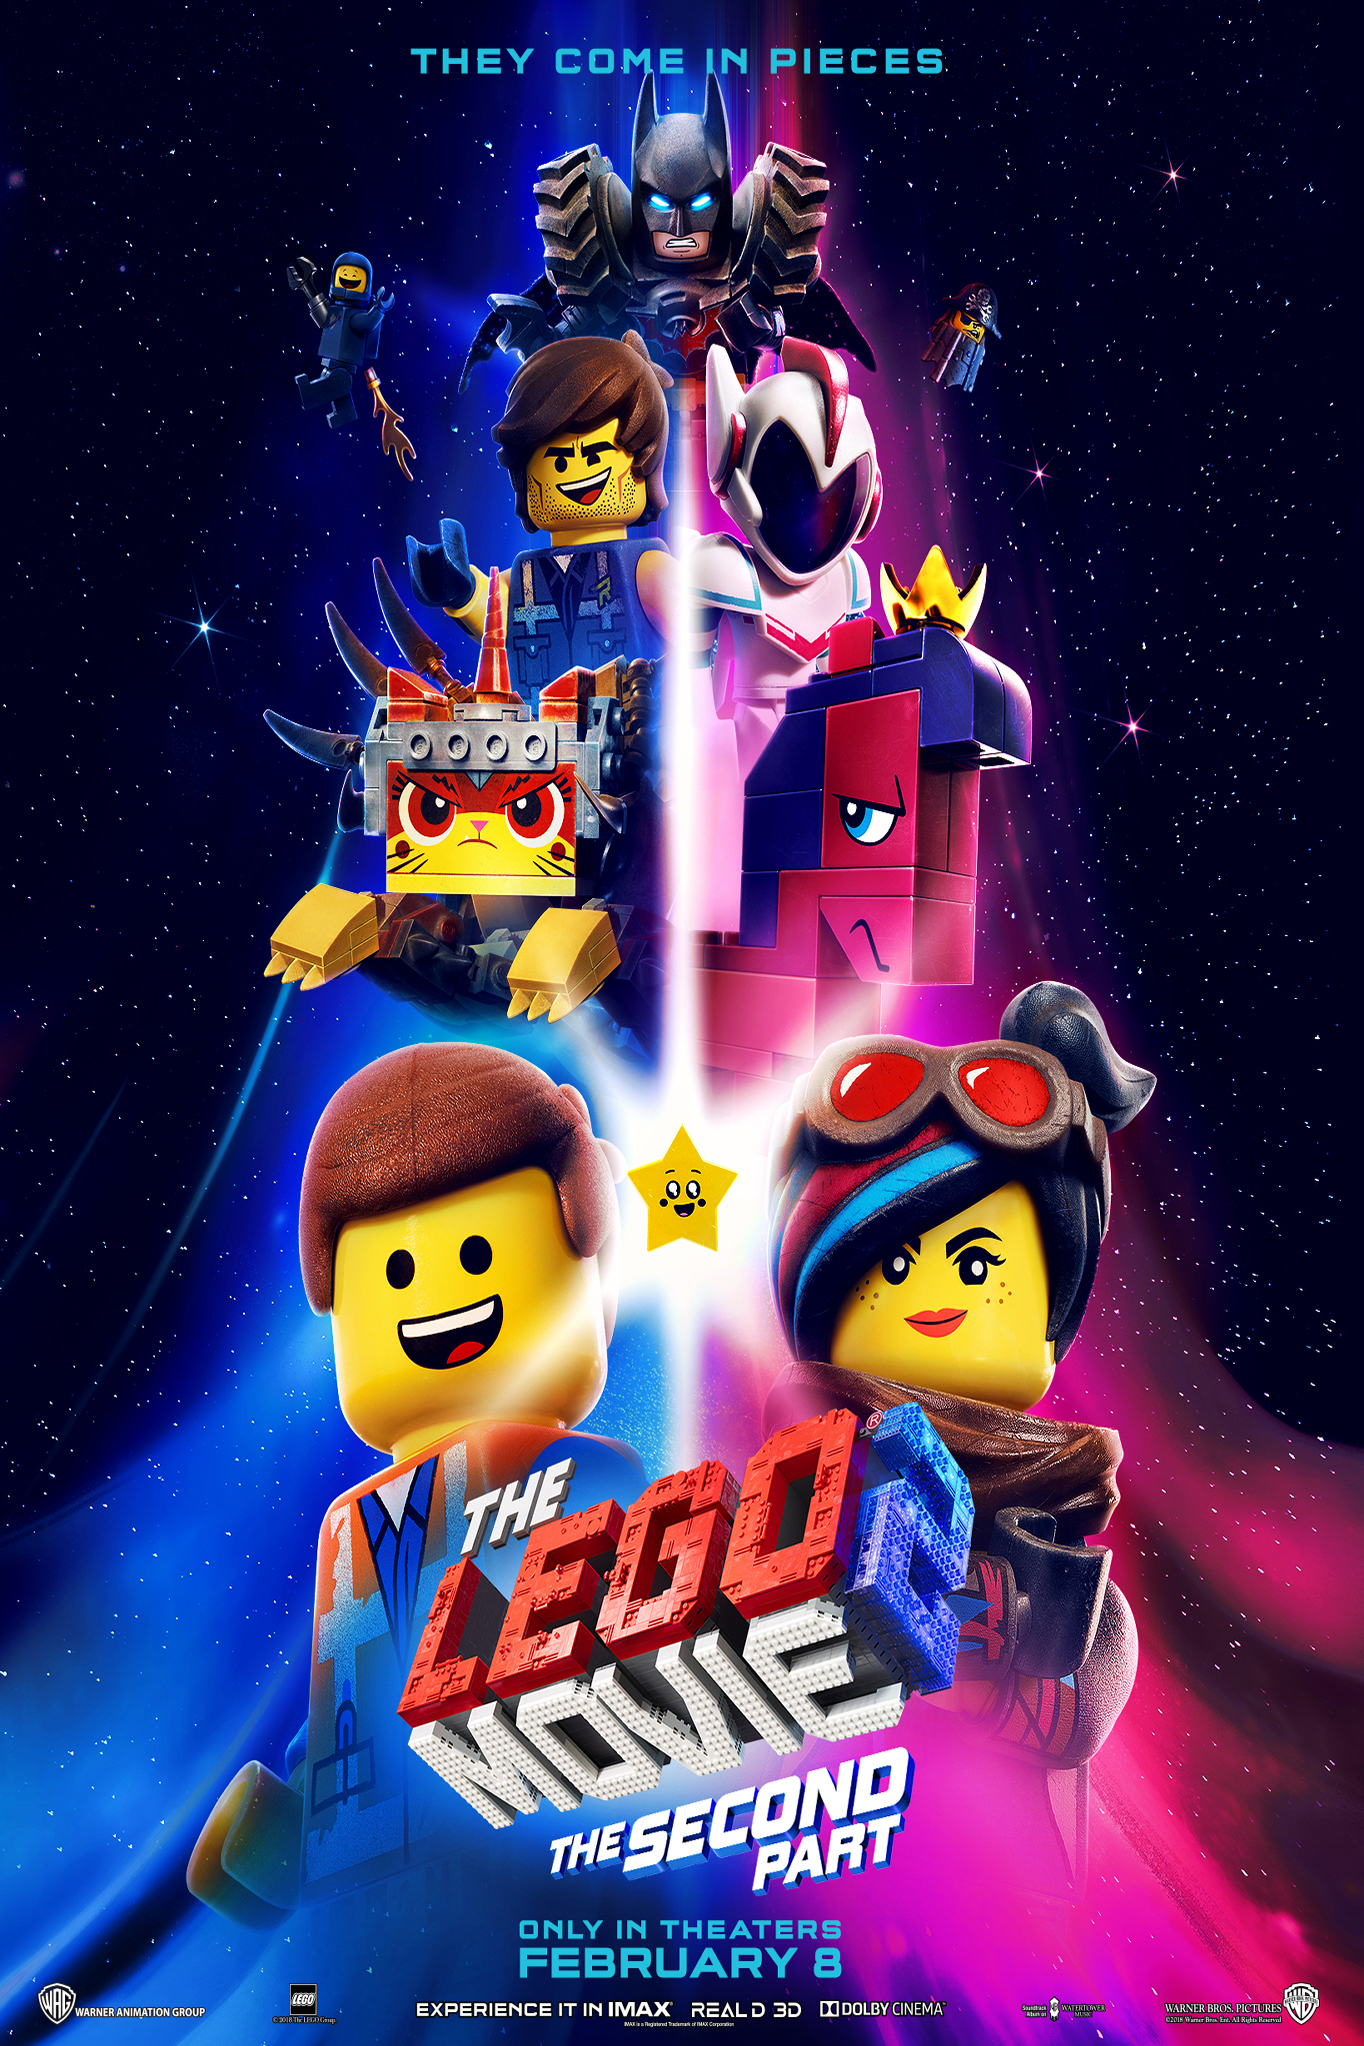 Lego Movie 2: The Second Part SFS Poster